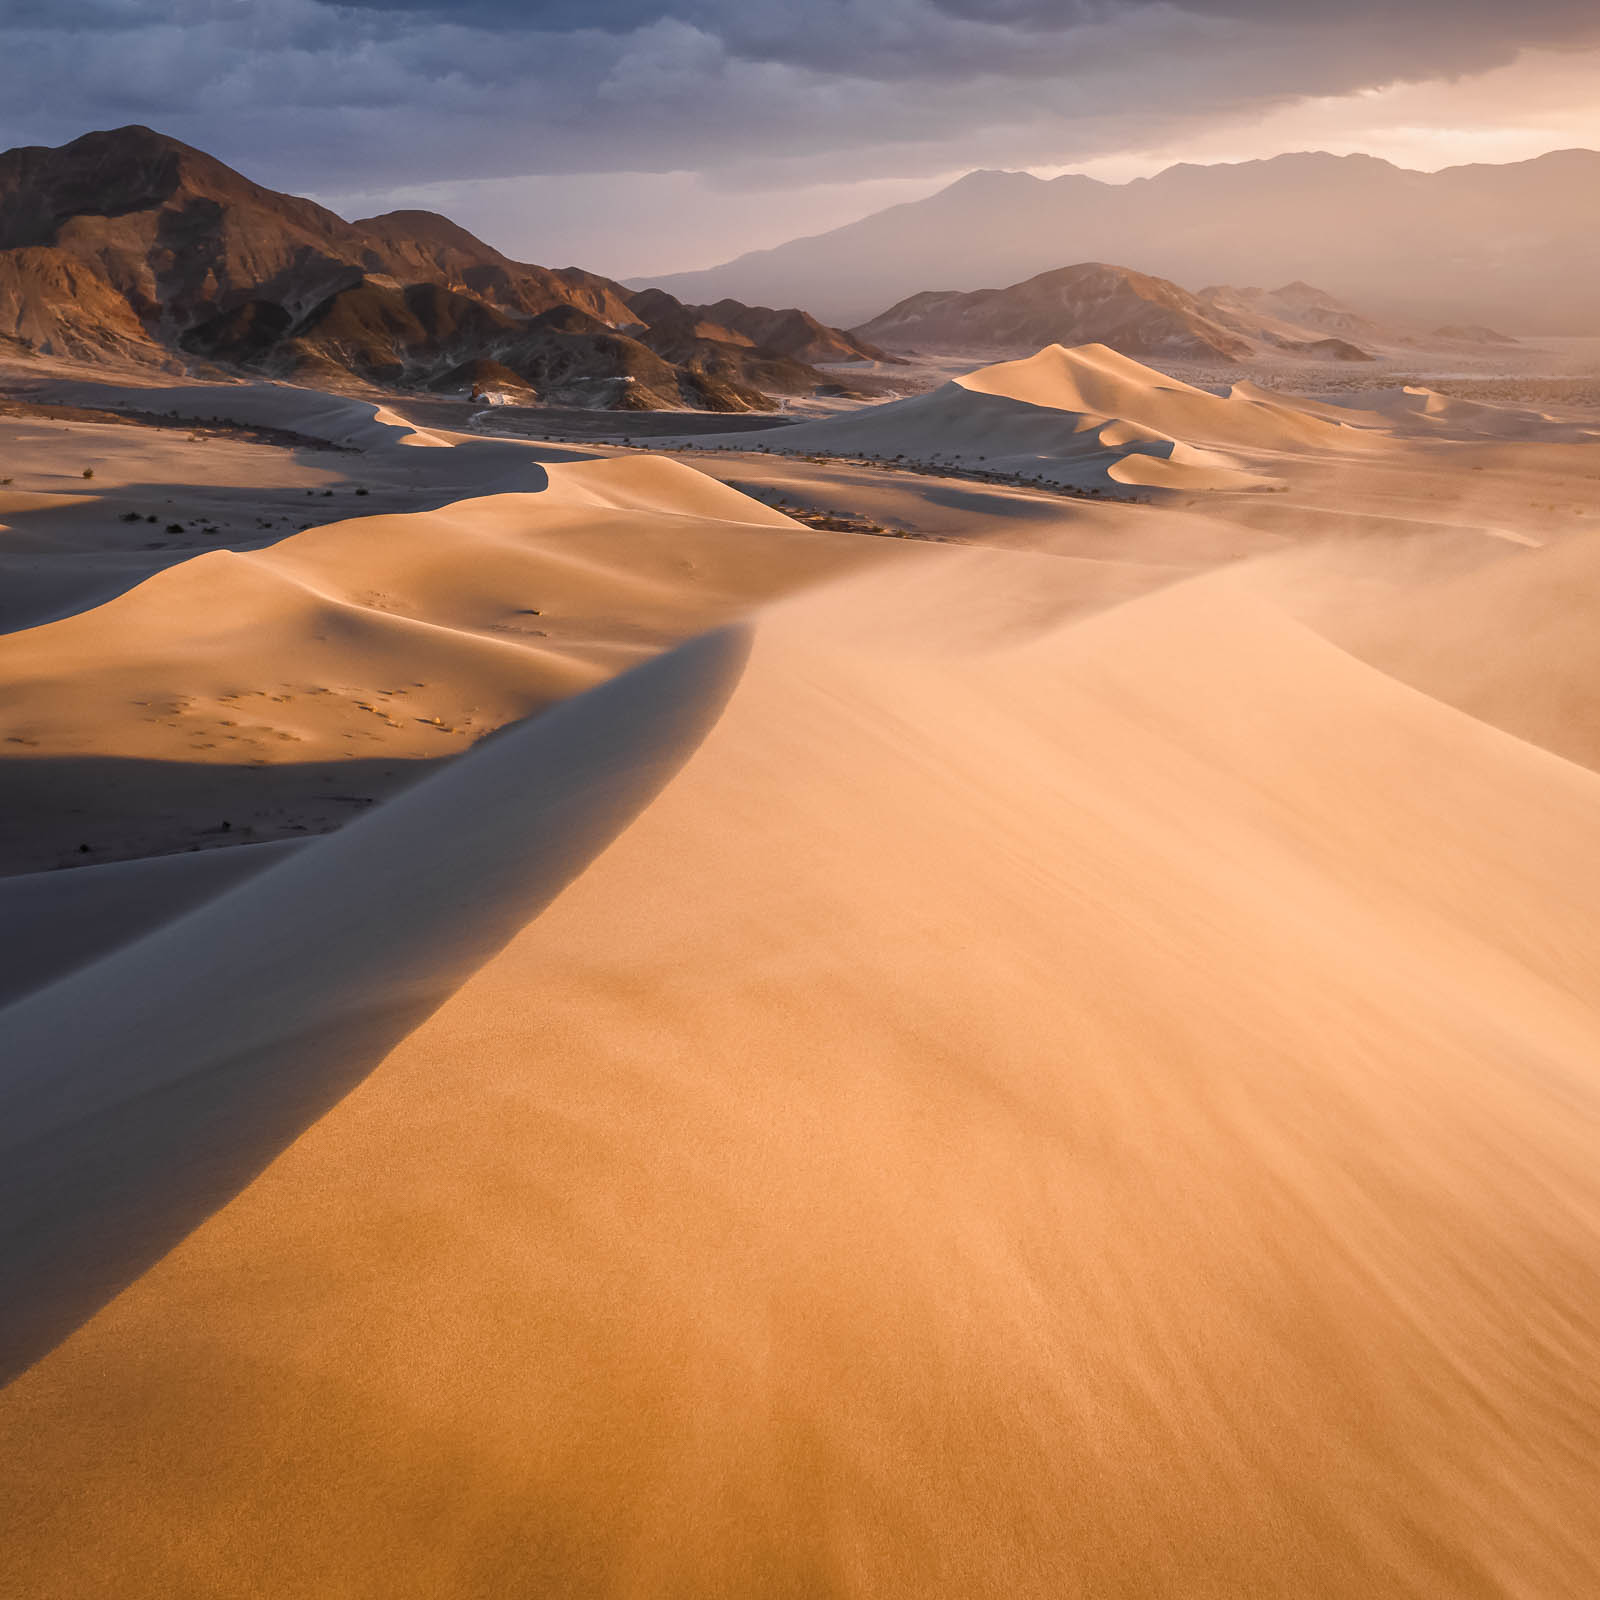 A remote set of sand dunes in Death Valley National Park at sunset.